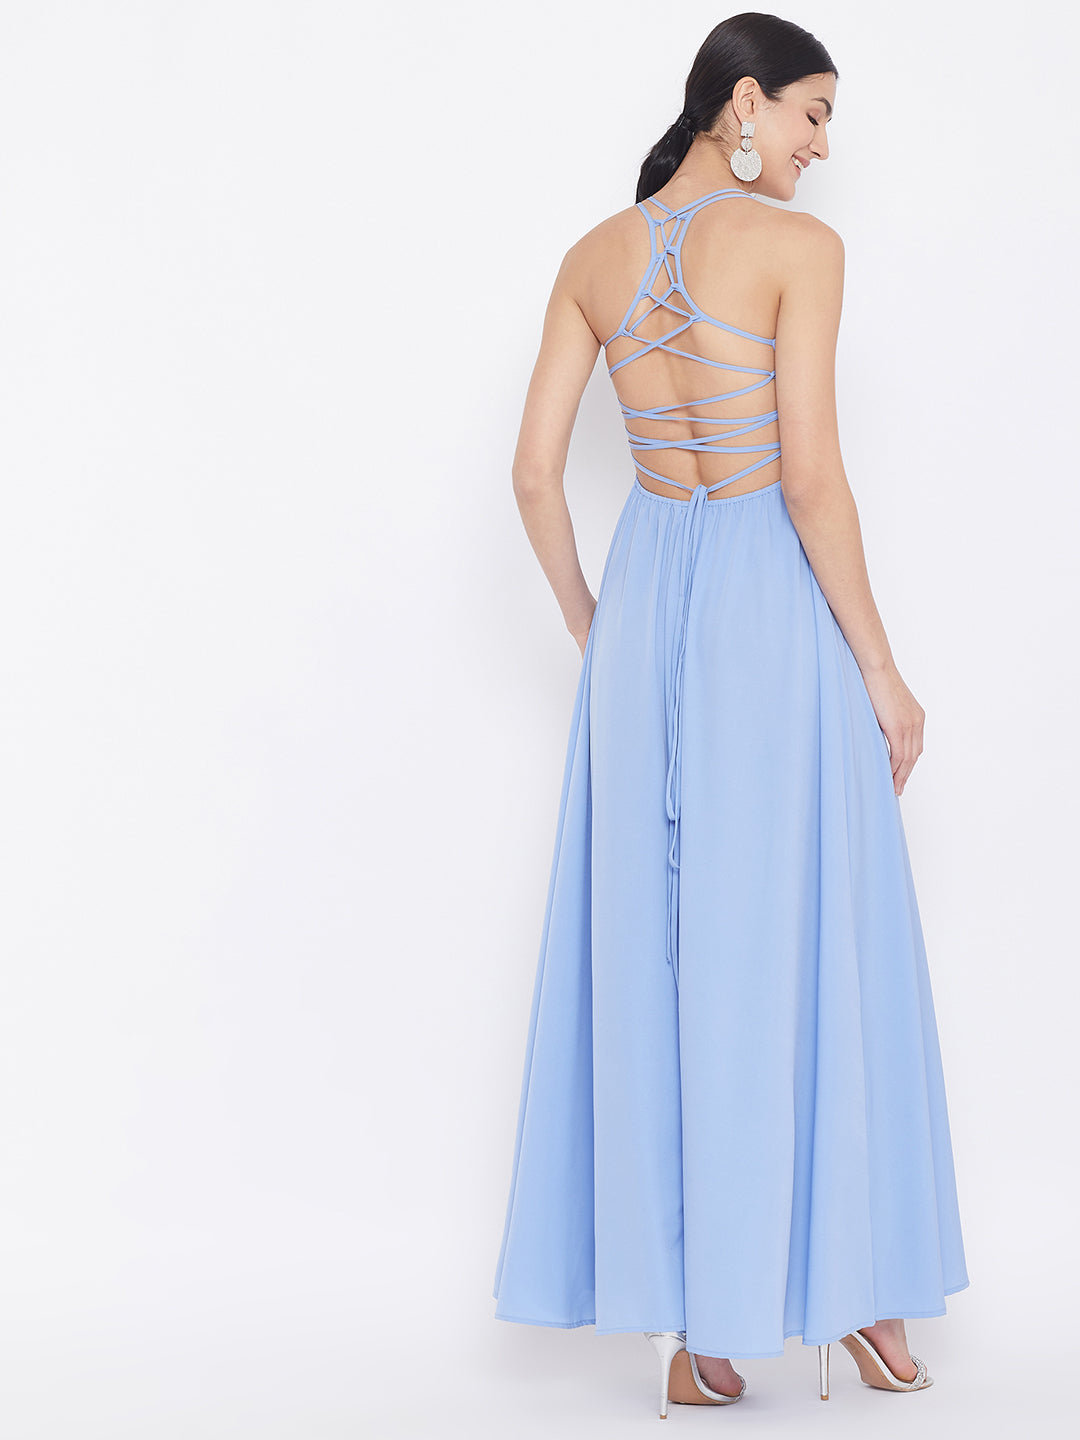 Berrylush Women Solid Blue Square Neck Tie-Up Caged Back Flared Maxi Dress